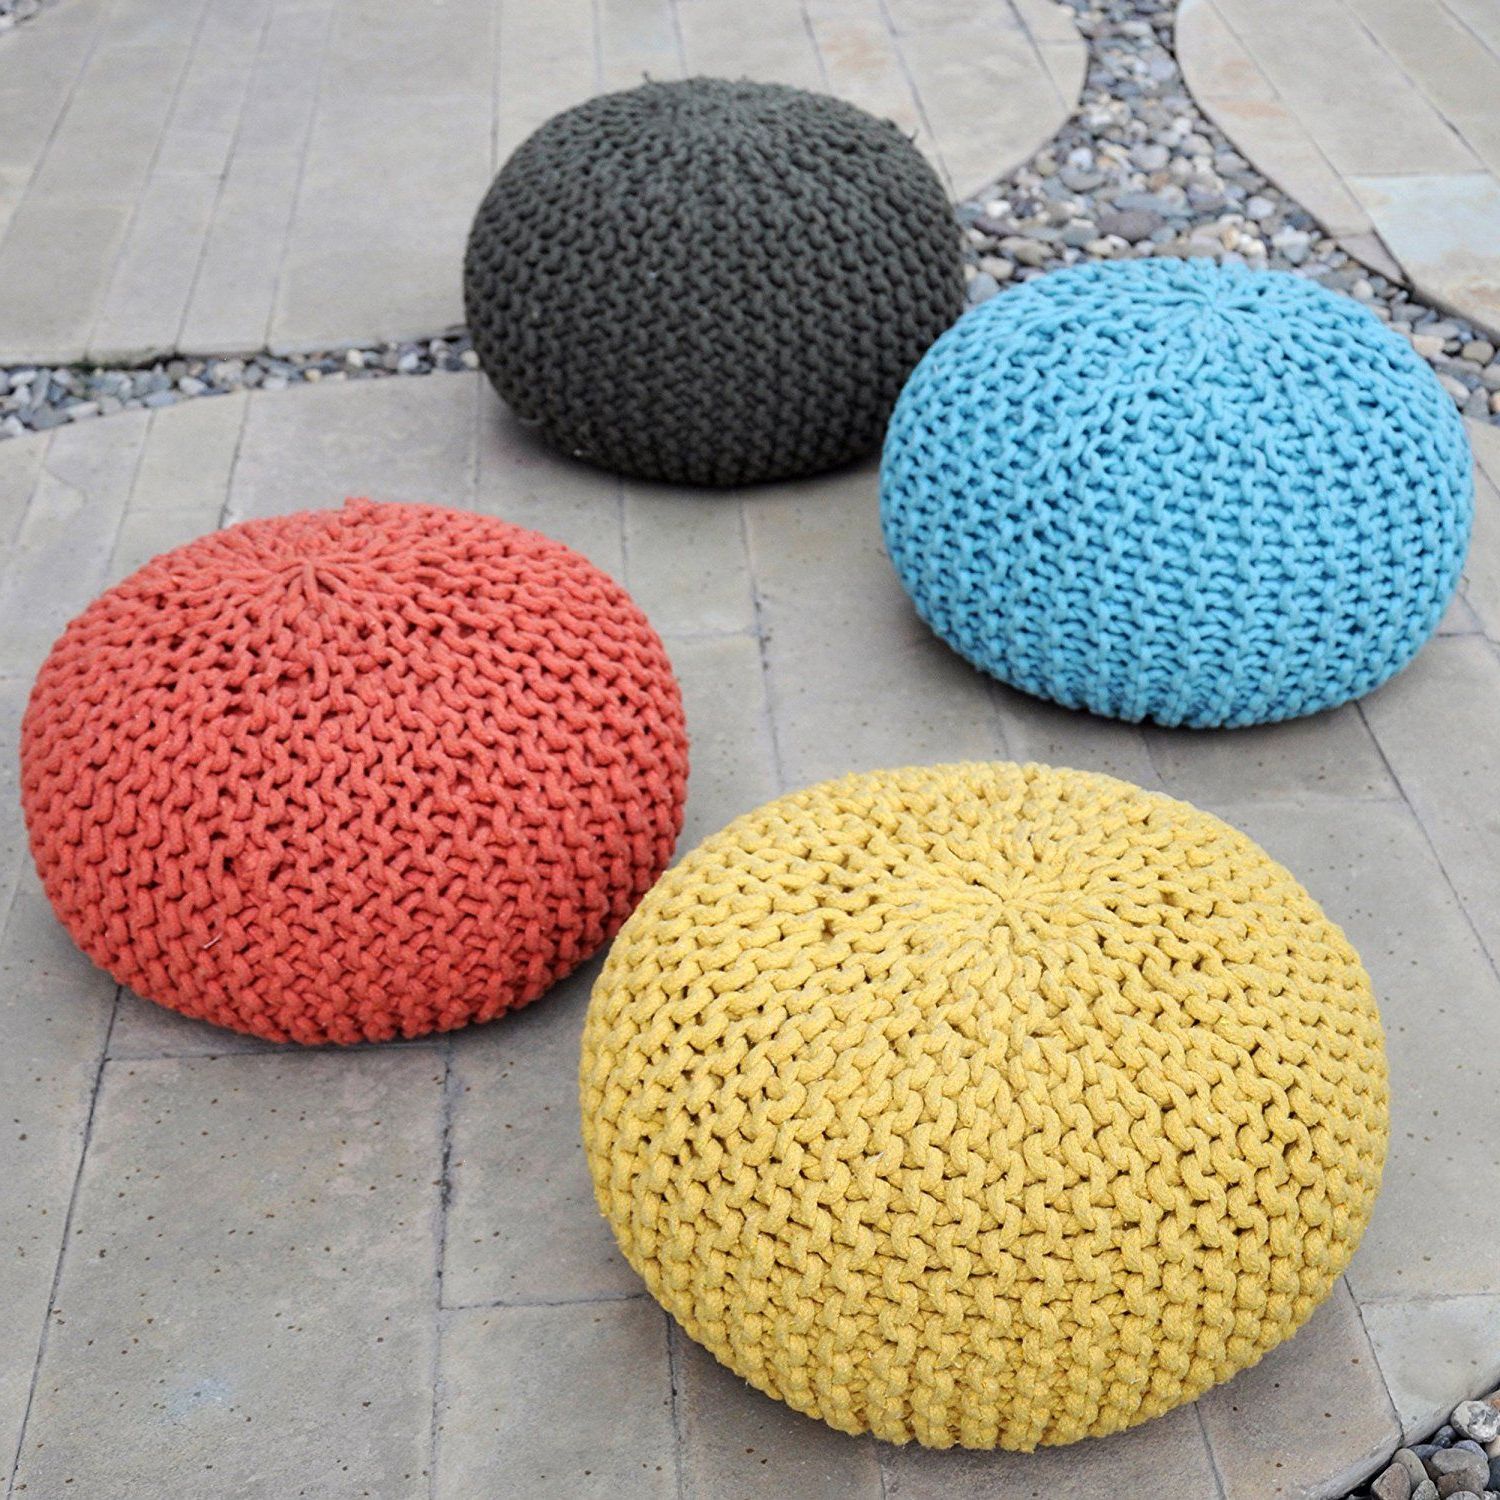 Most Recently Released Cream Cotton Knitted Pouf Ottomans Intended For Amazon: Poona Hand Knitted Artisan Round Pouf (aqua): Kitchen (View 6 of 10)